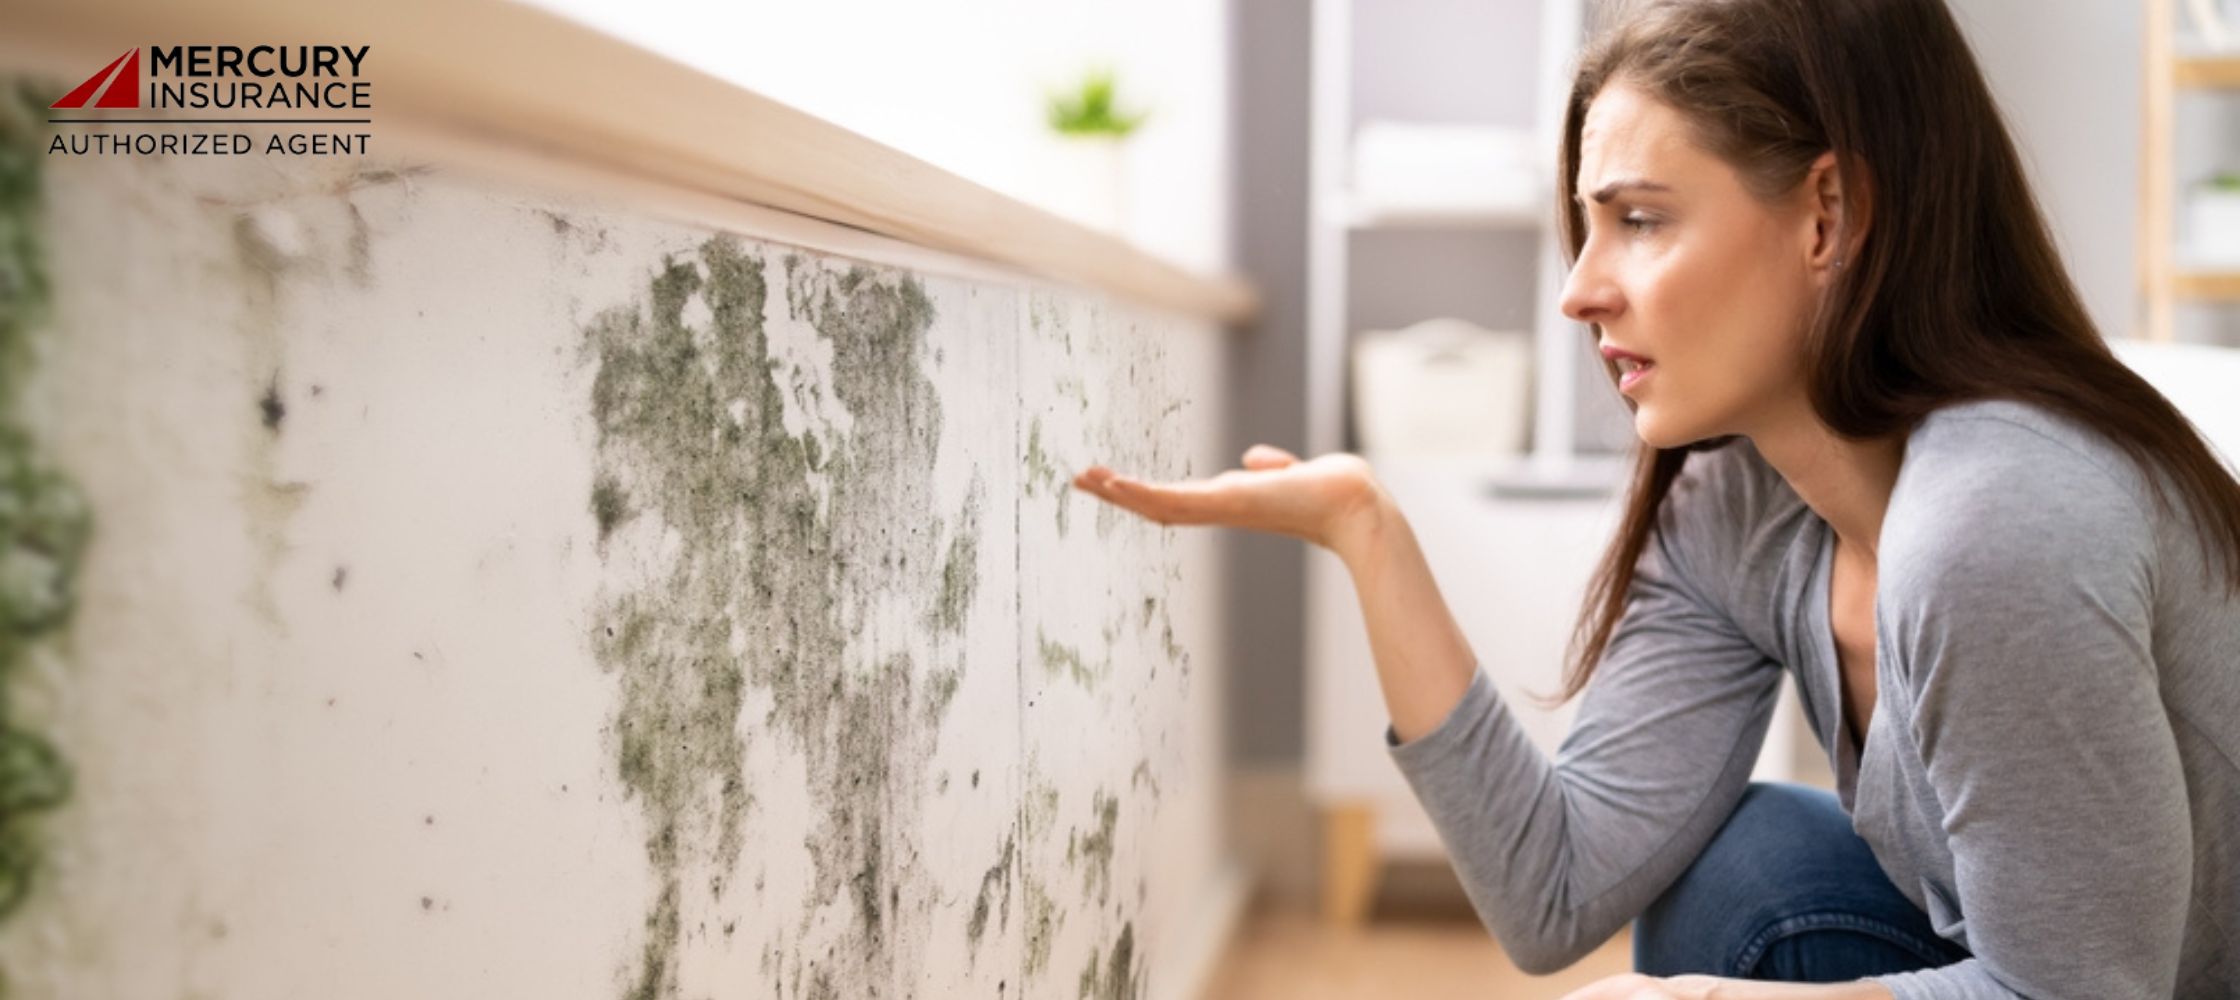 Does Your Homeowners Insurance Include Mold Coverage